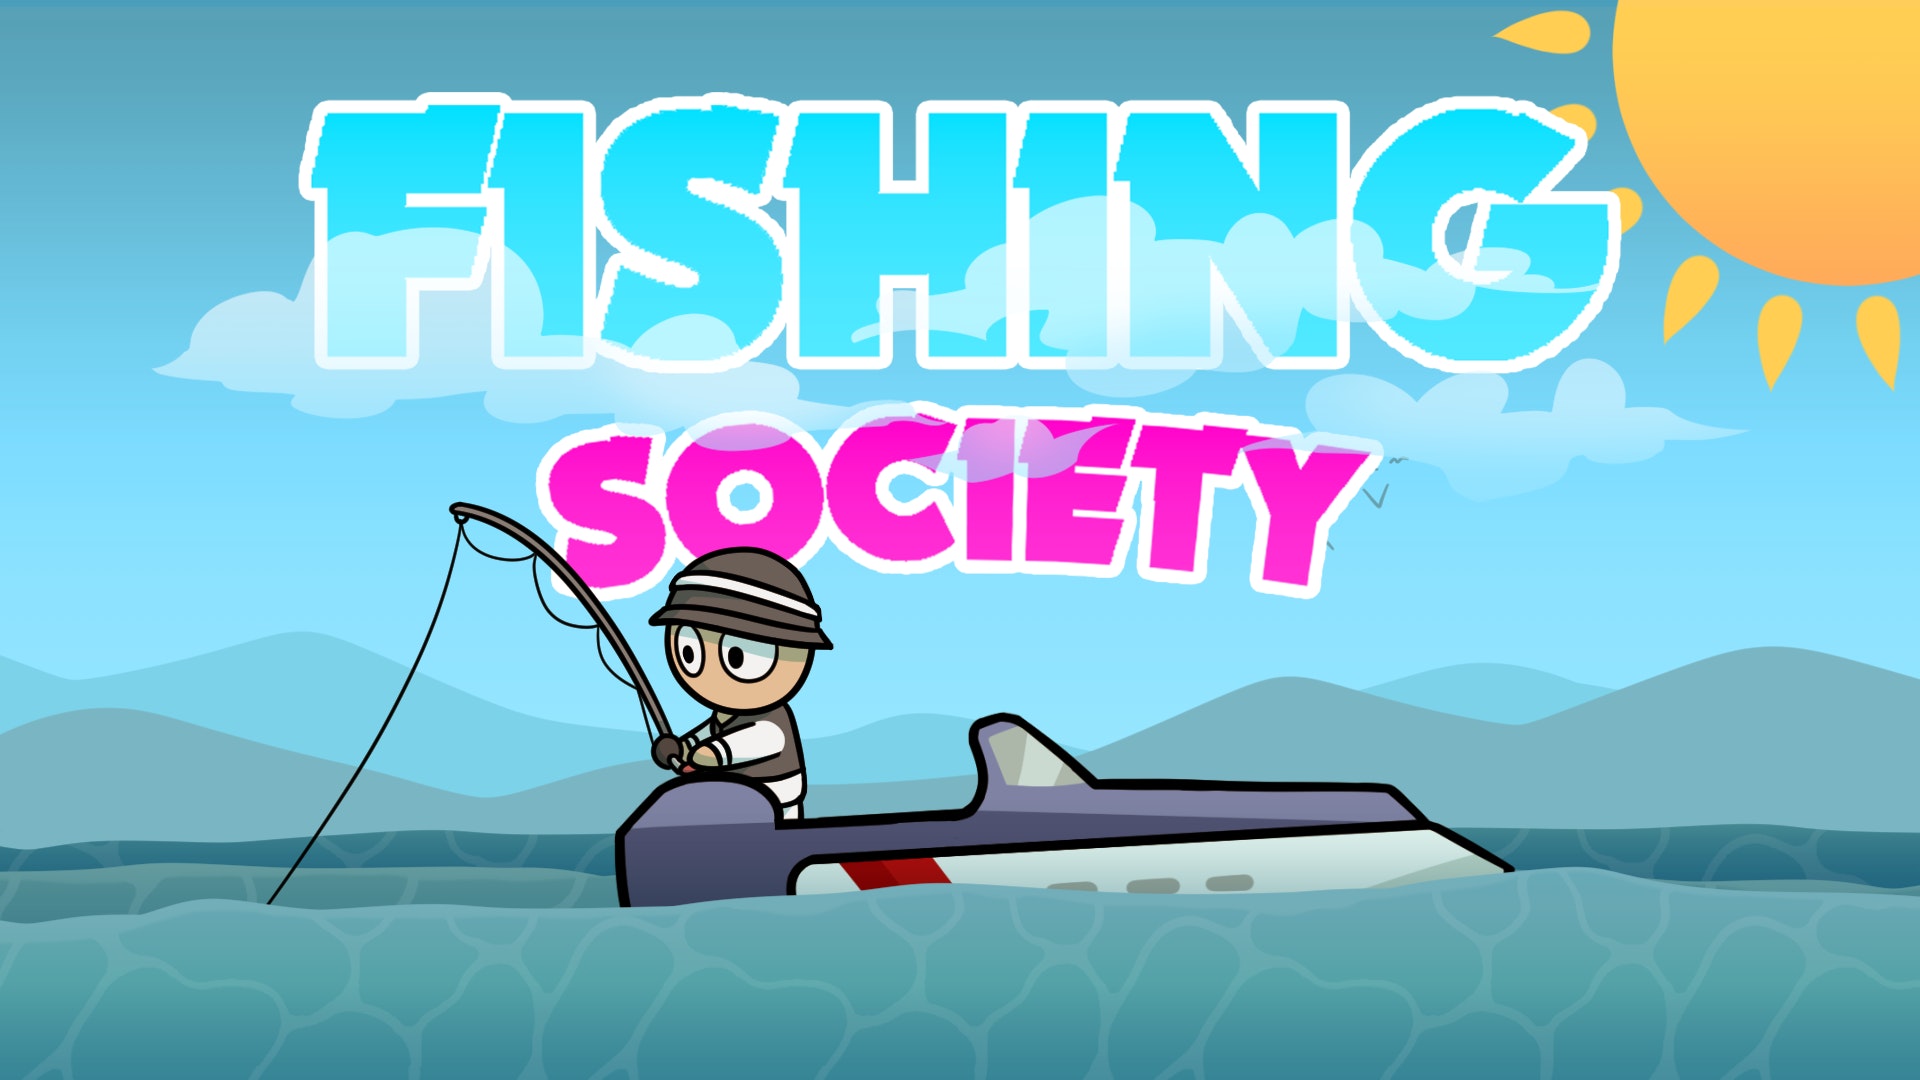 🕹️ Play Crazy Fishing Game: Free Online Deep Sea Cartoon Fishing Video  Game for Kids & Adults